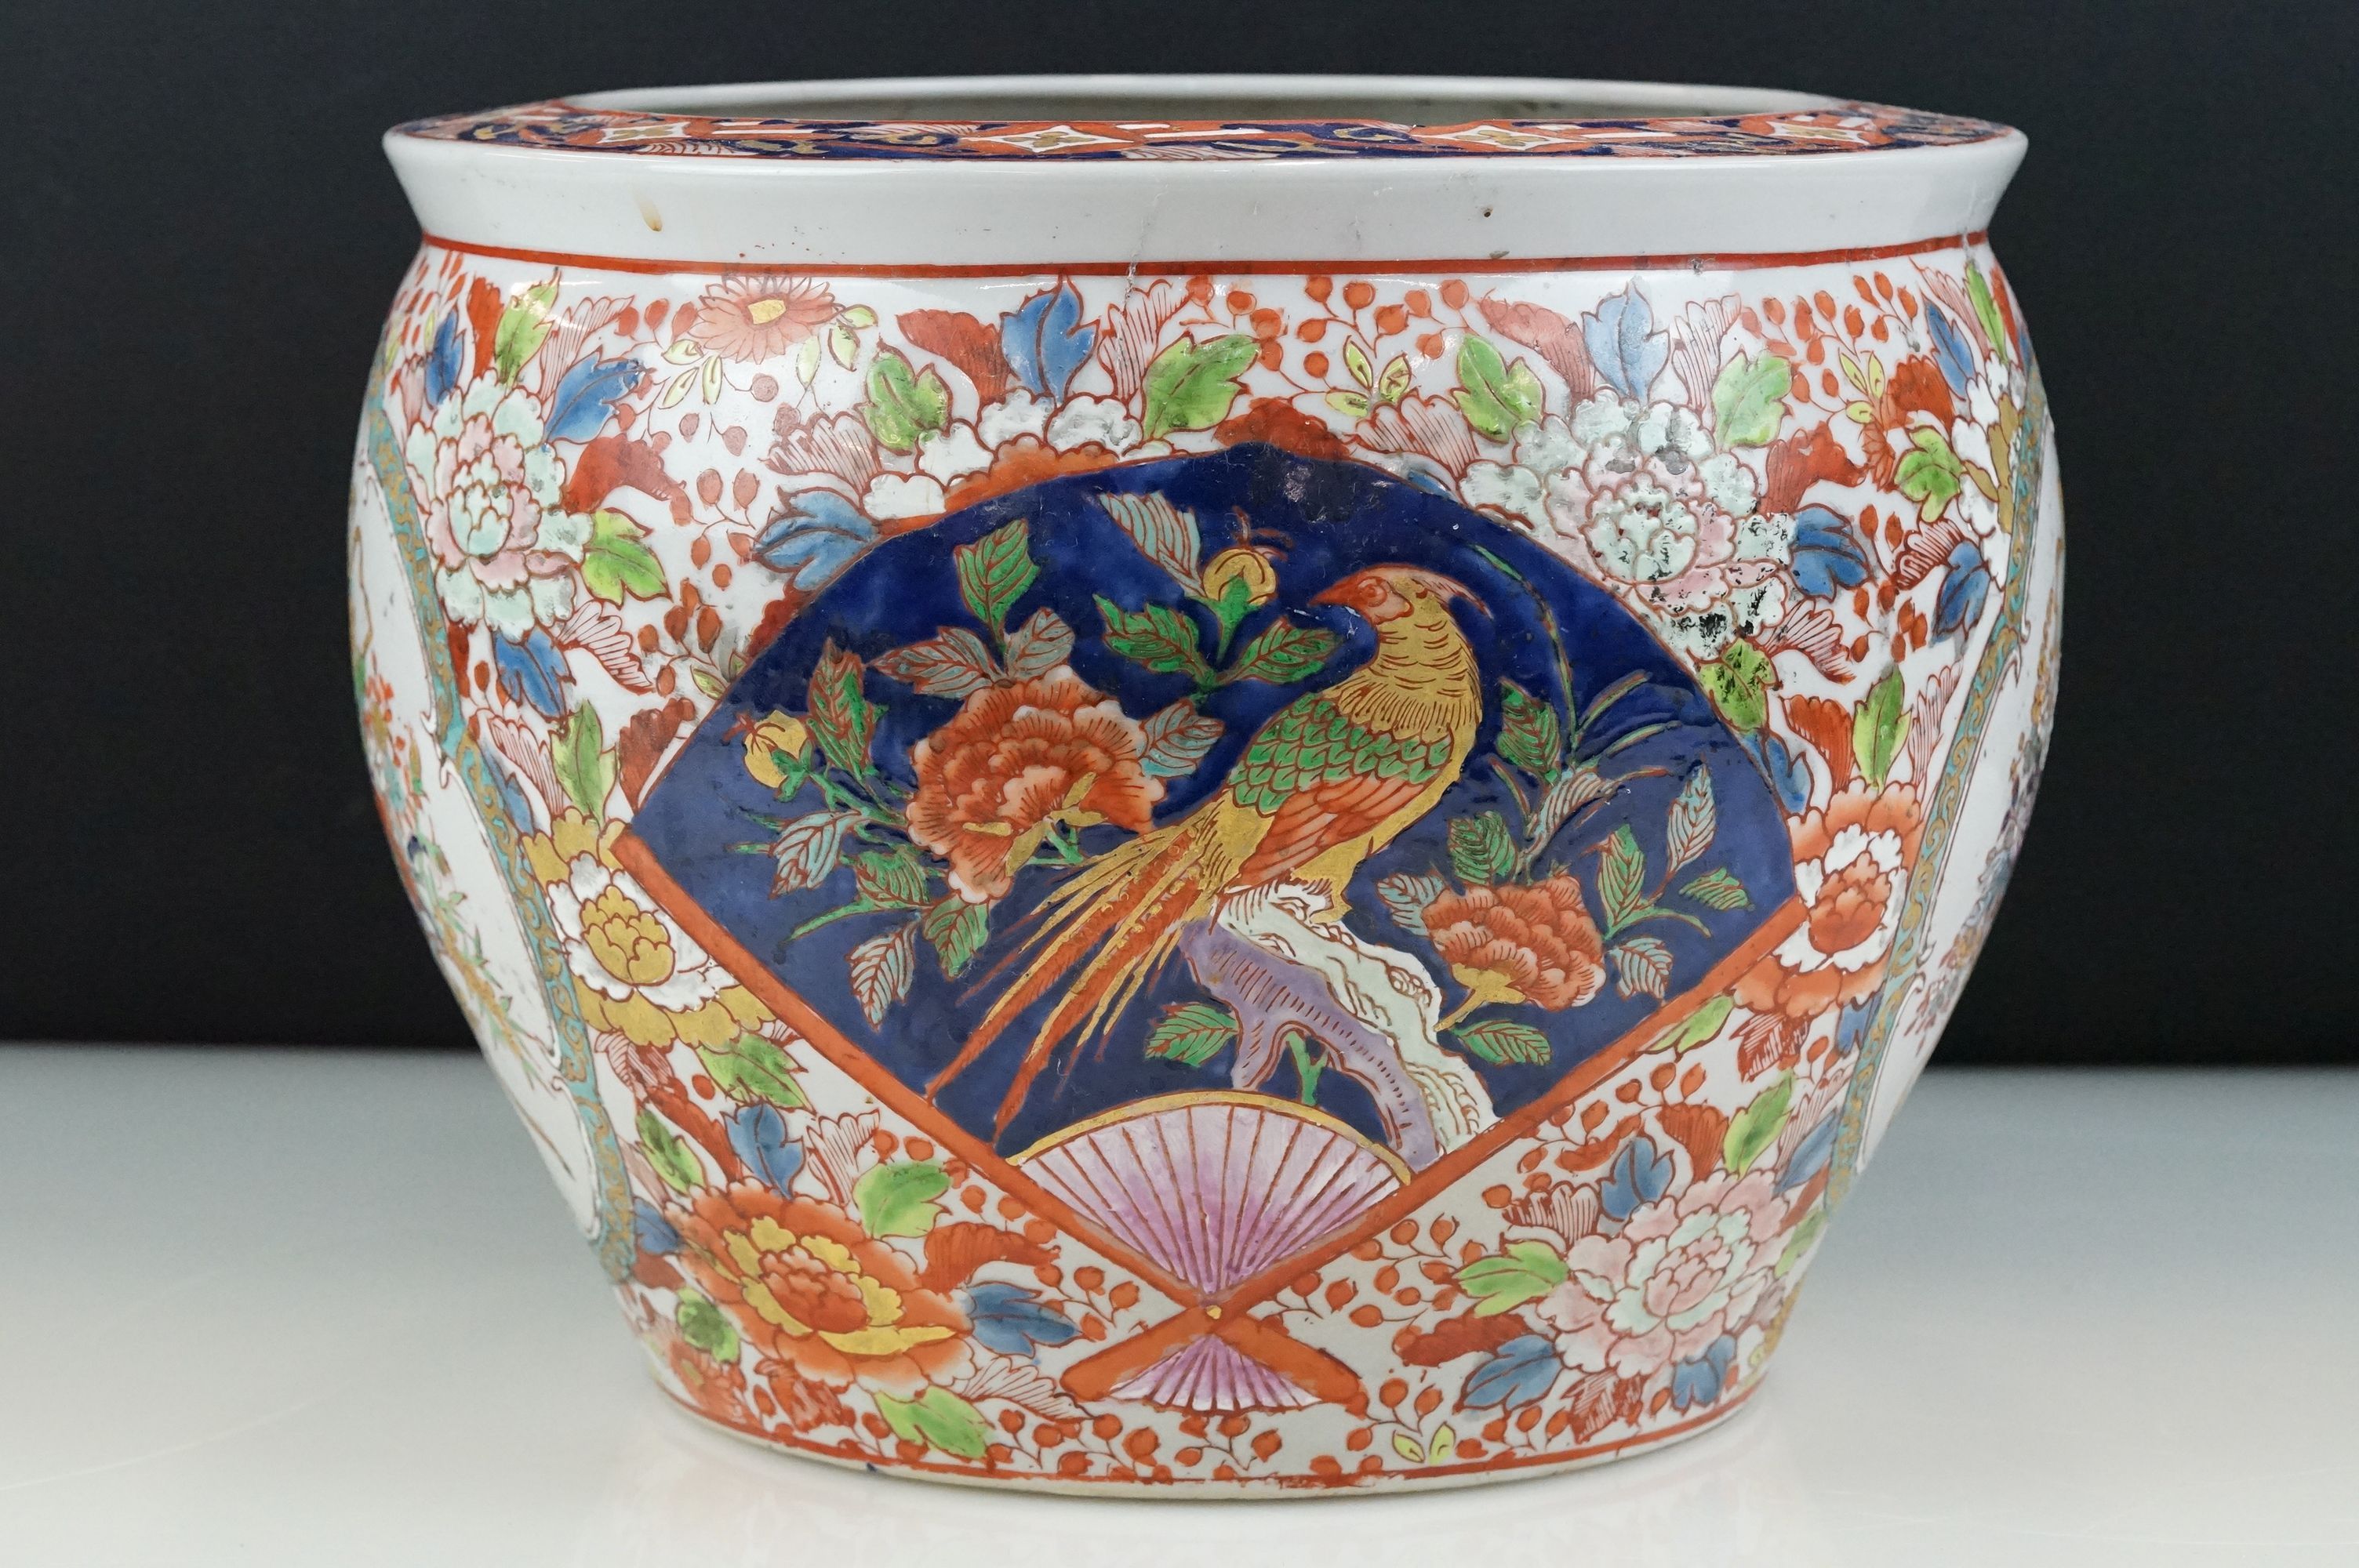 20th century Chinese Stoneware Fish Bowl decorated in a floral pattern of red, greens and blues, - Image 4 of 10